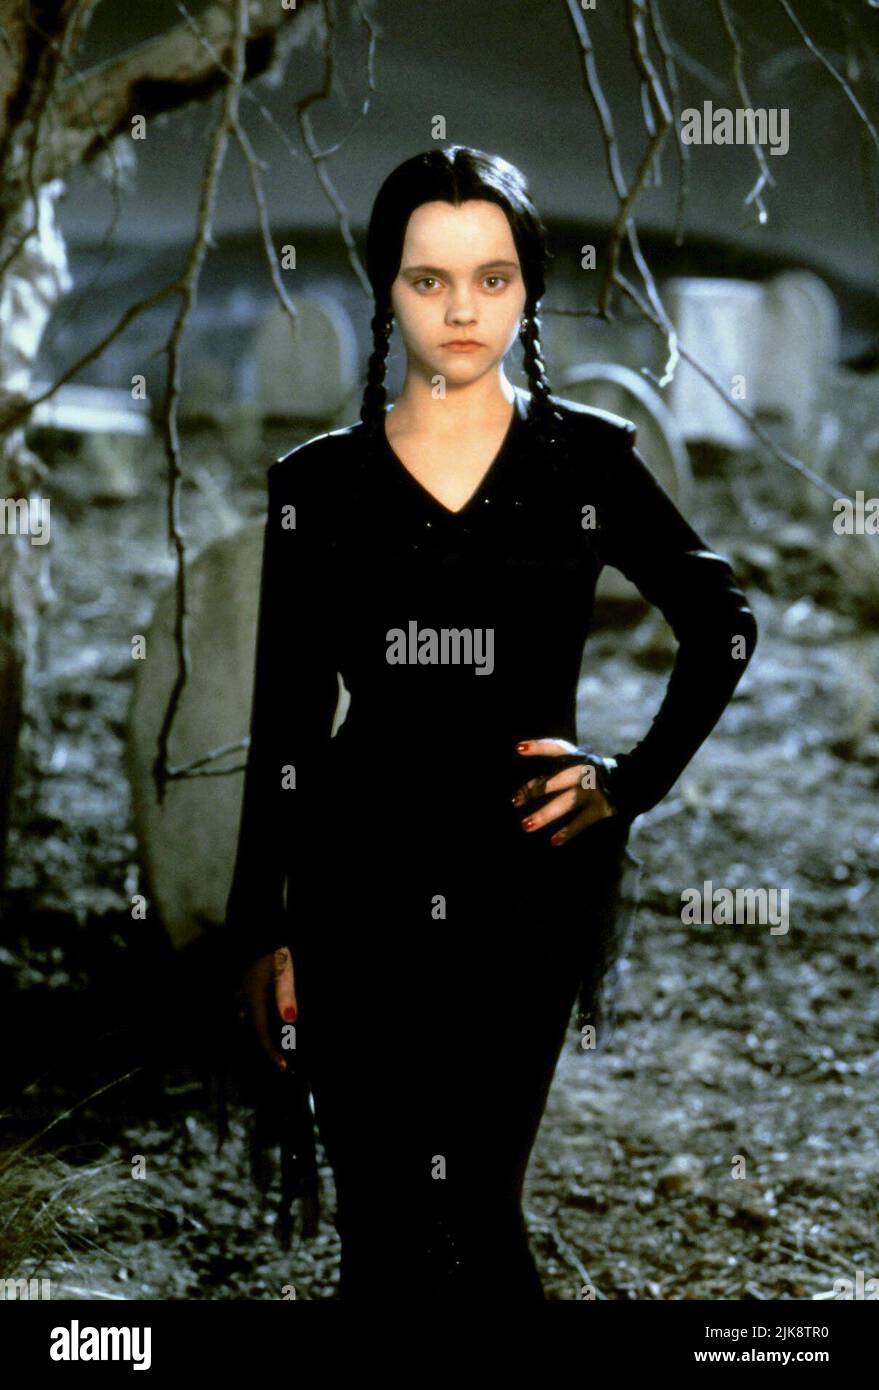 Which Wednesday Addams outfit is your favourite? : r/WednesdayTVSeries